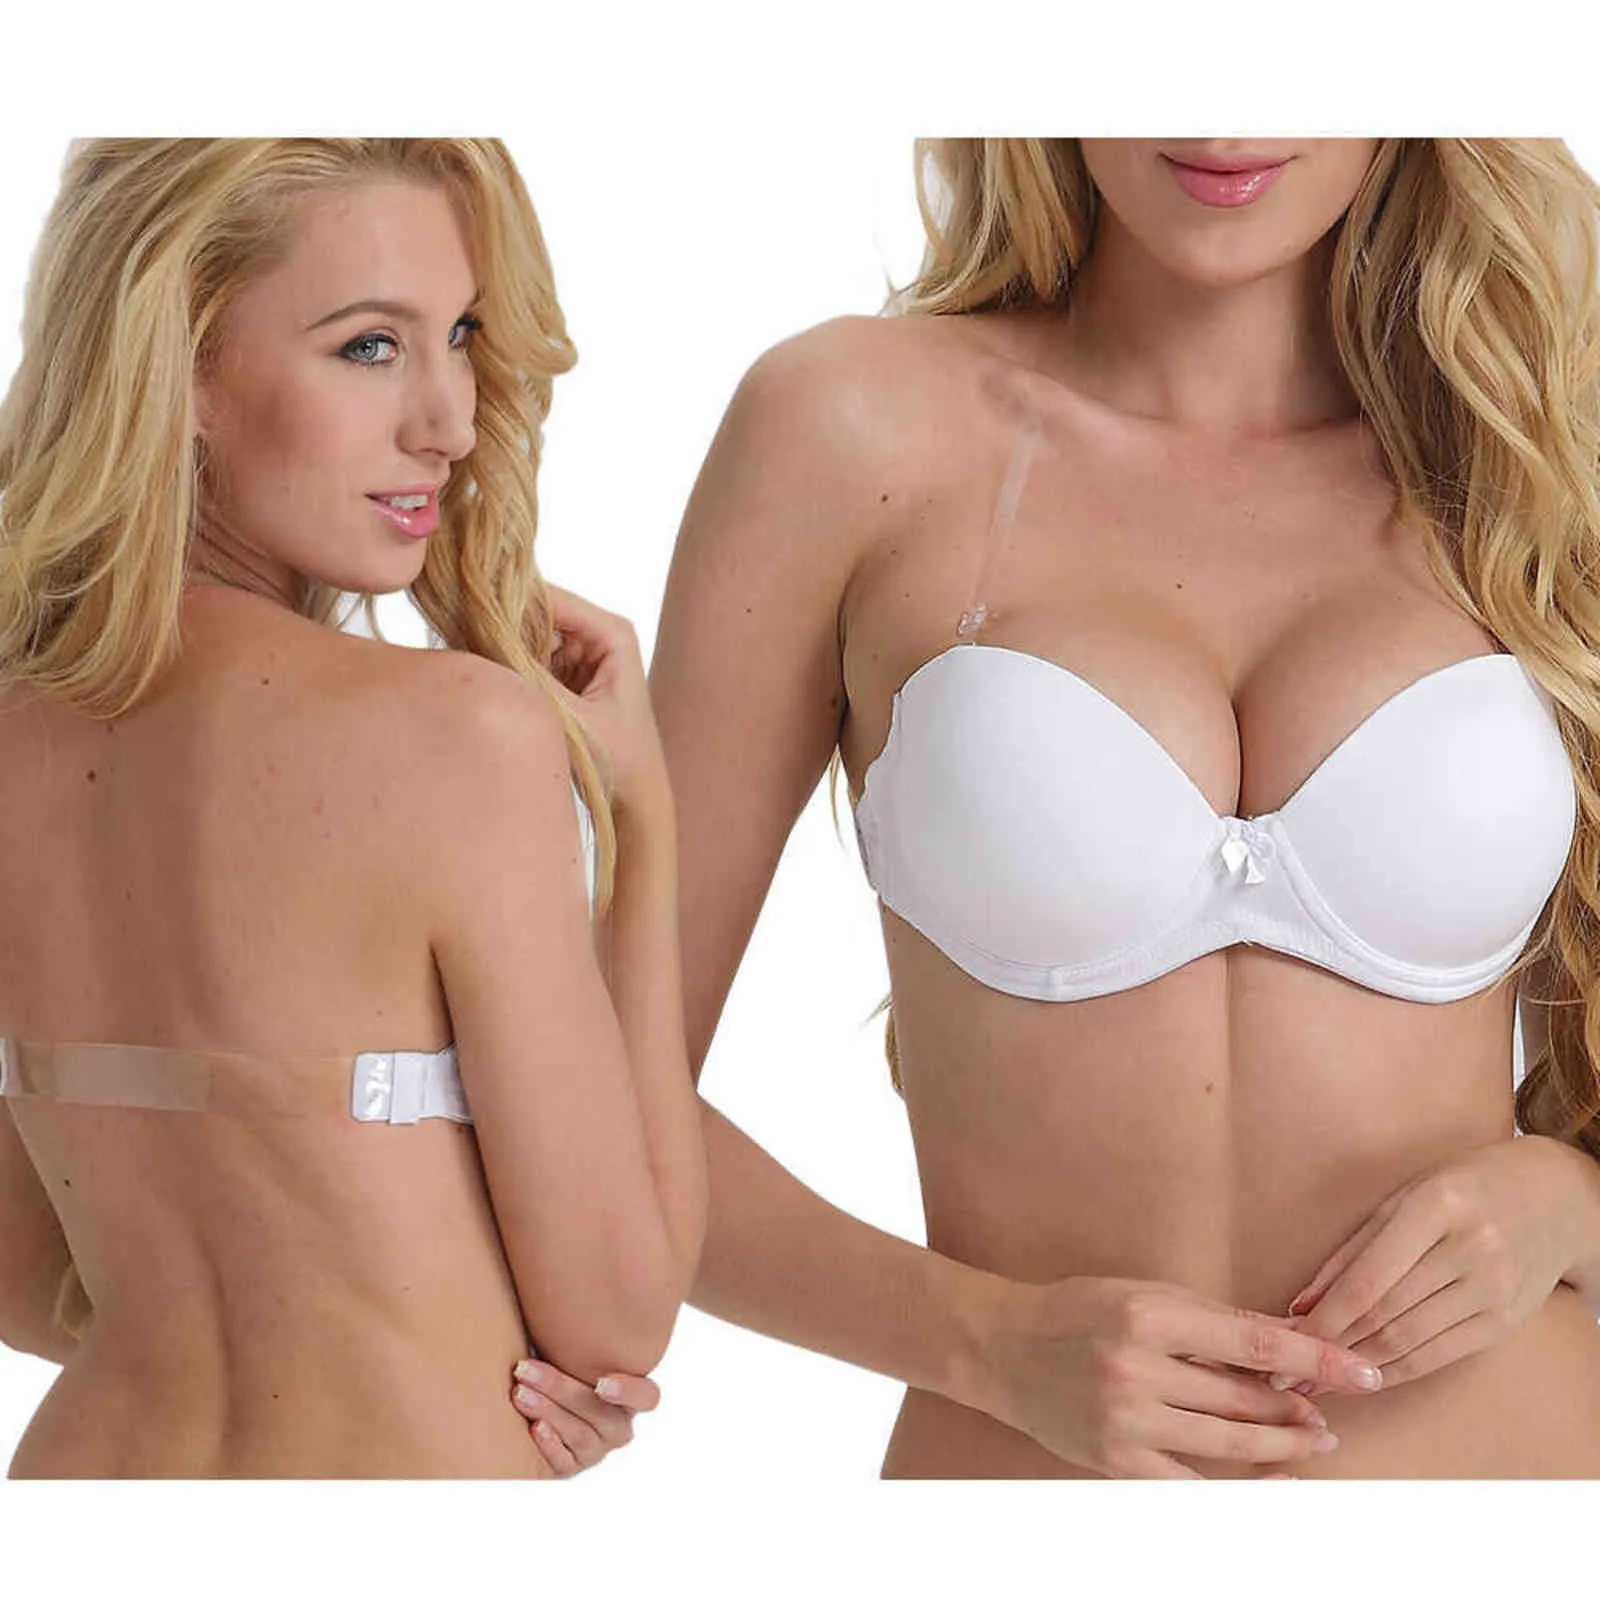 White Strap Upless Push Up Bra With Non Slip Band Strap Up For Women Plus  Size 32 44 C F Vgplay 211110 From Dou04, $10.93